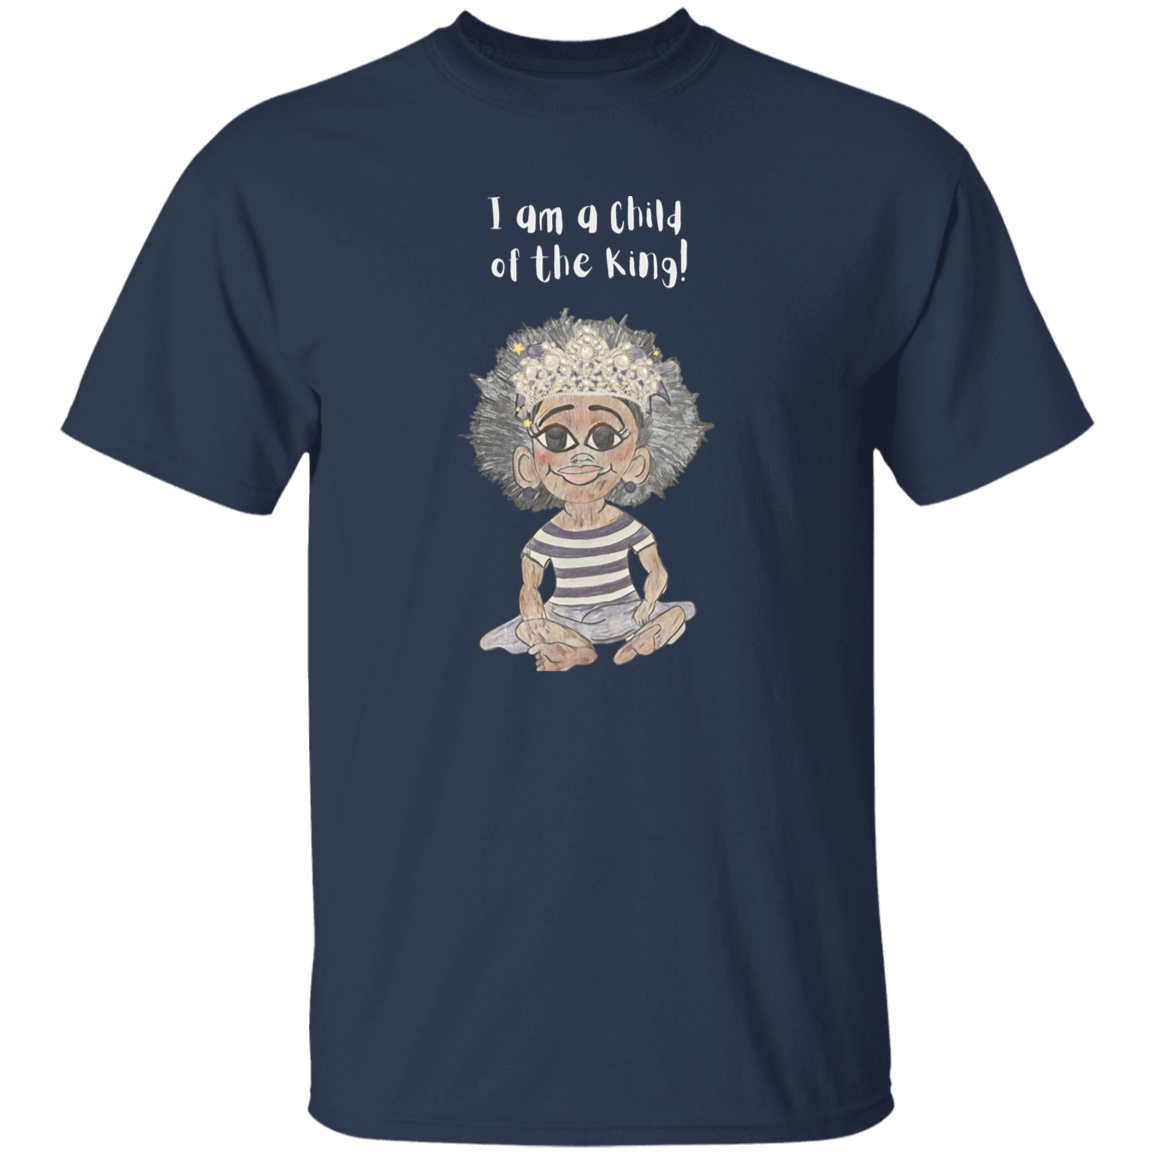 I am a child of the King Youth 5.3 oz 100% Cotton T-Shirt